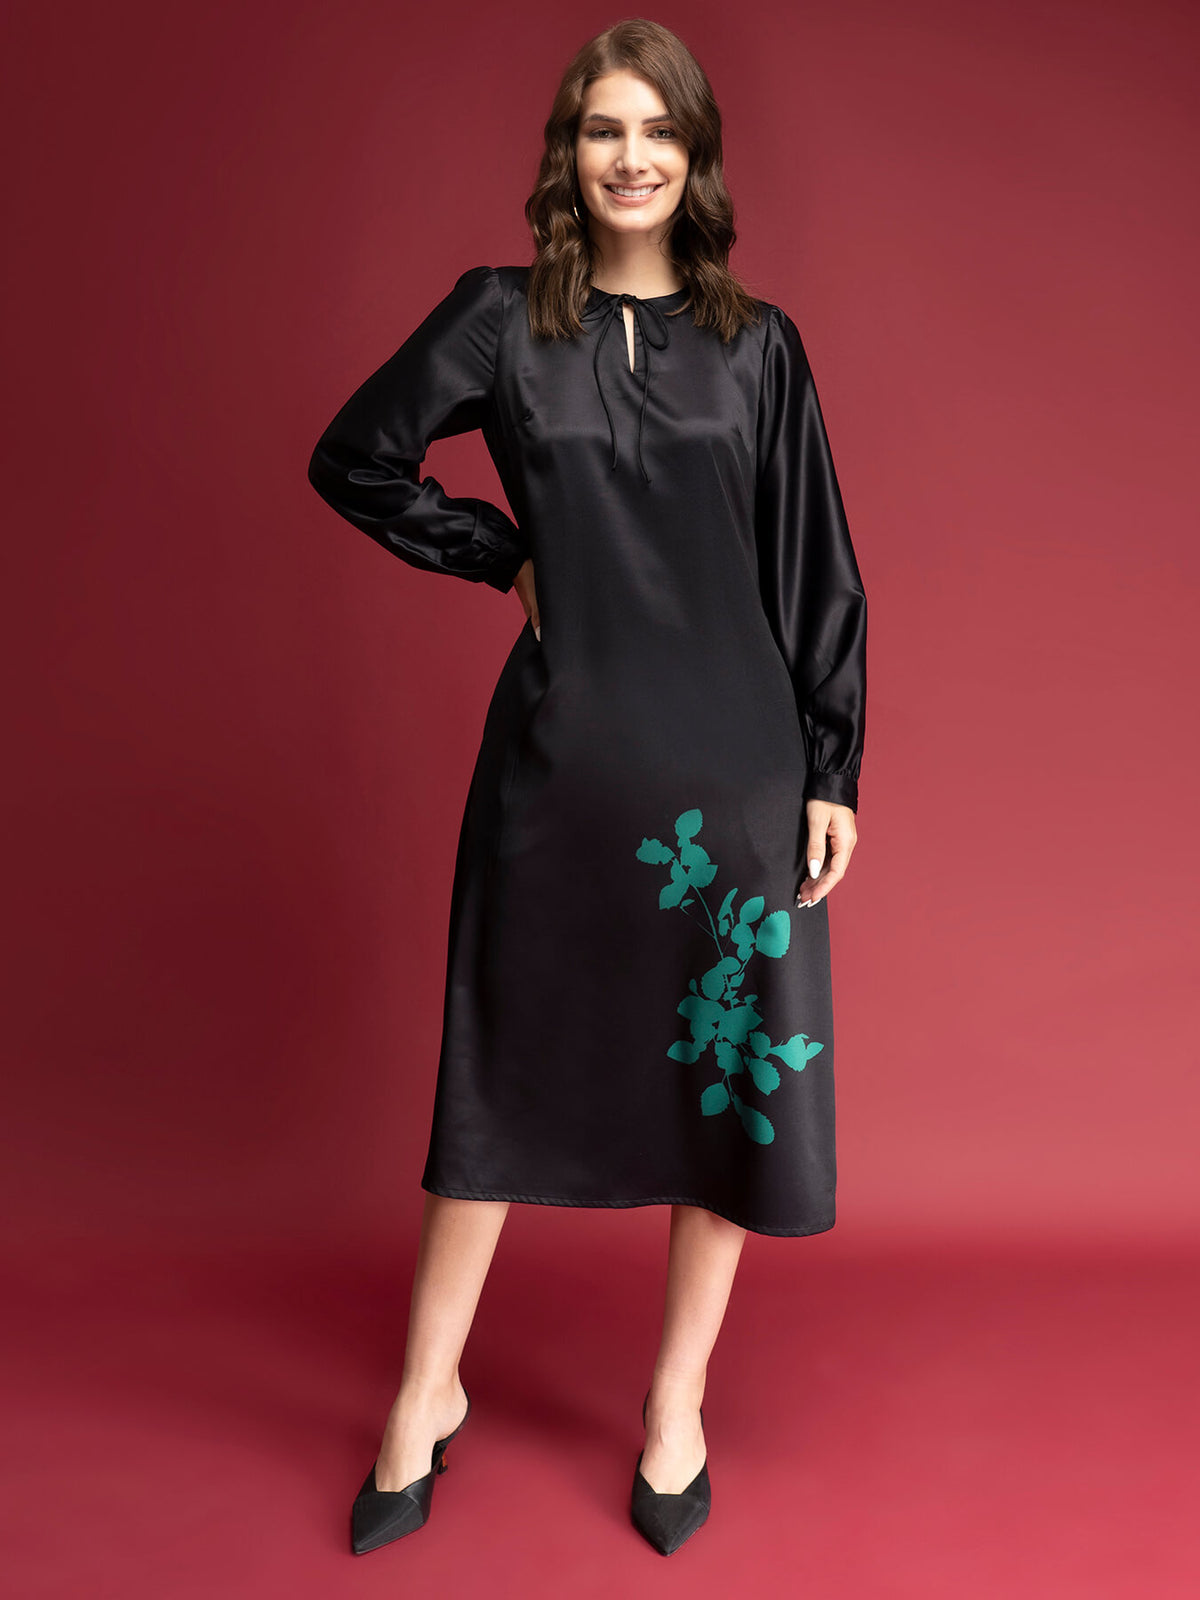 Satin Floral Print A-Line Dress - Black And Green